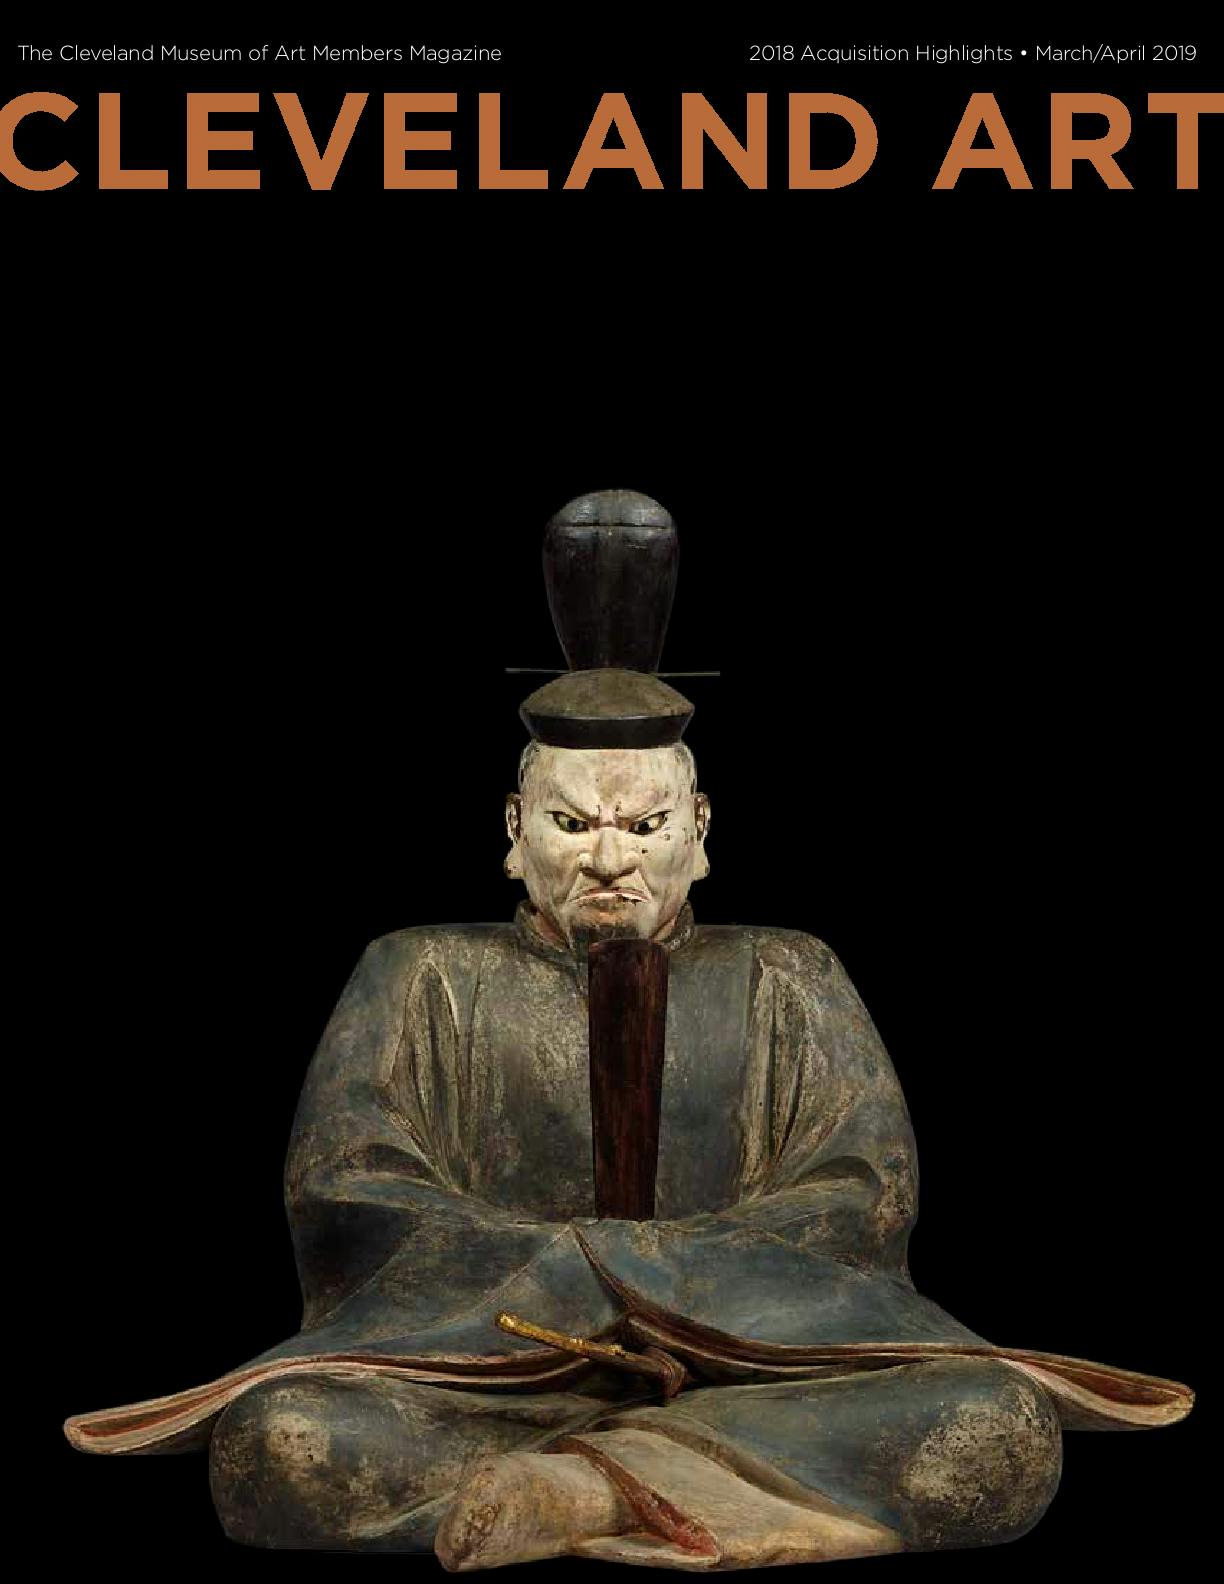 Cleveland Art magazine cover, Japanese sculpture of a man in a robe